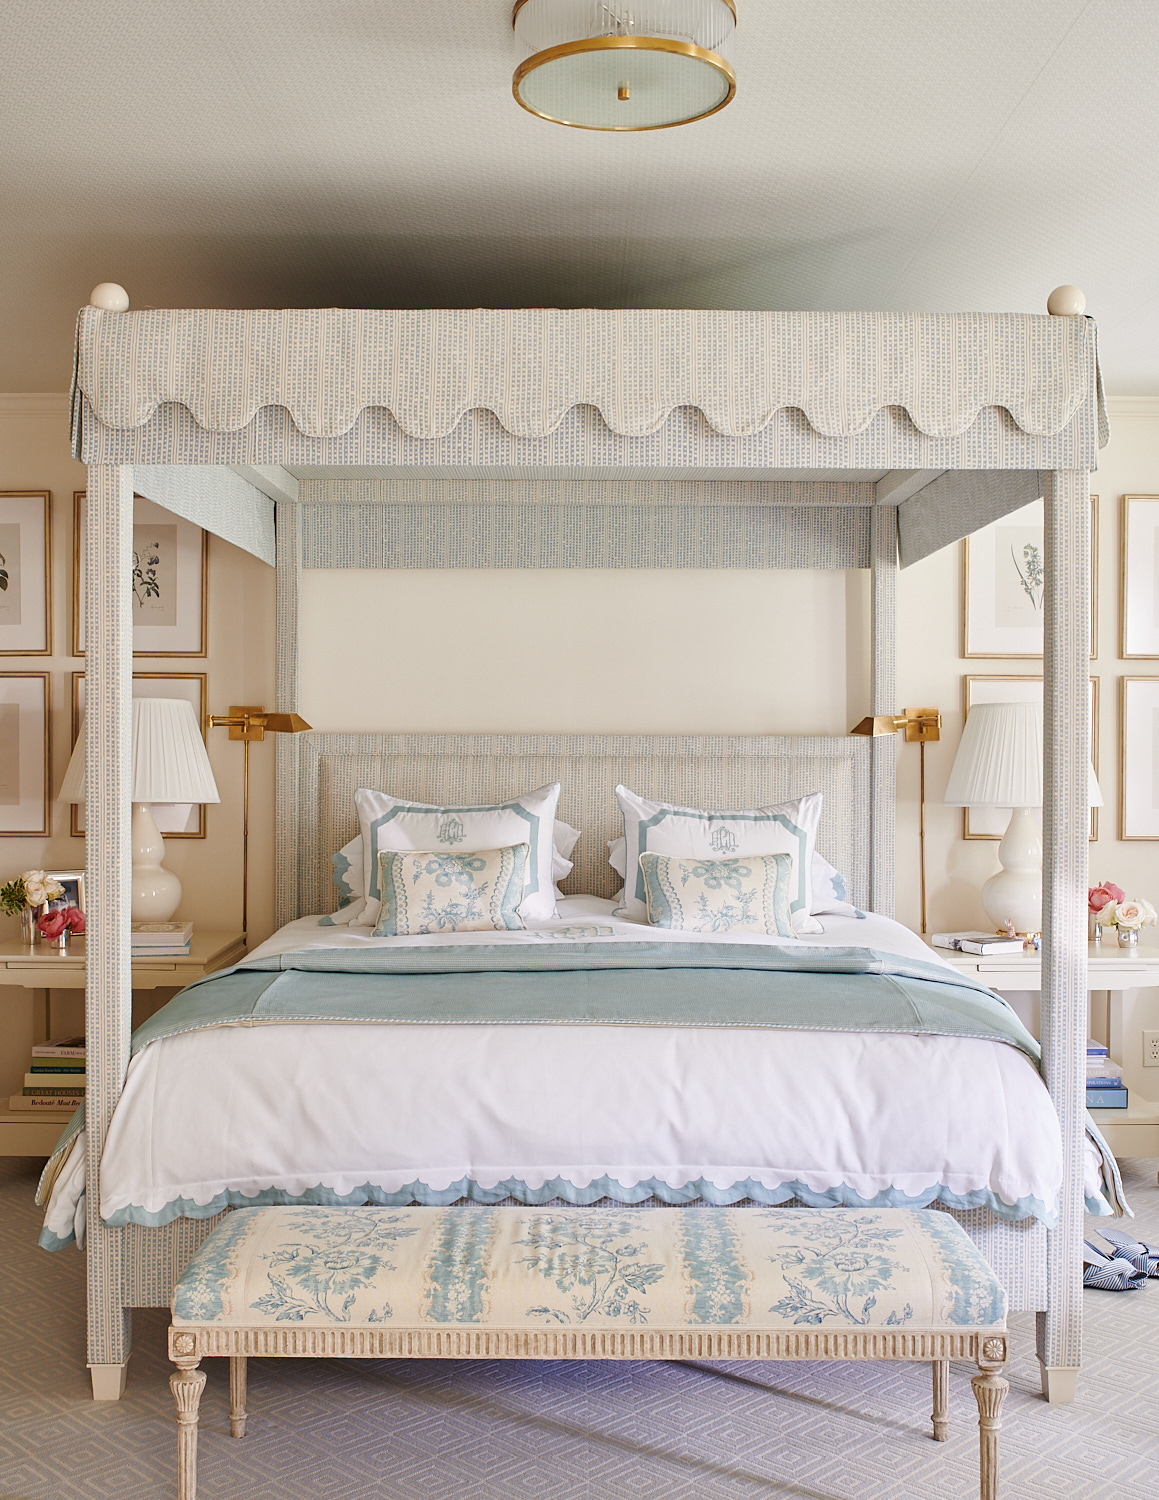 Upholstered bed canopy, shams pillows, and headboard